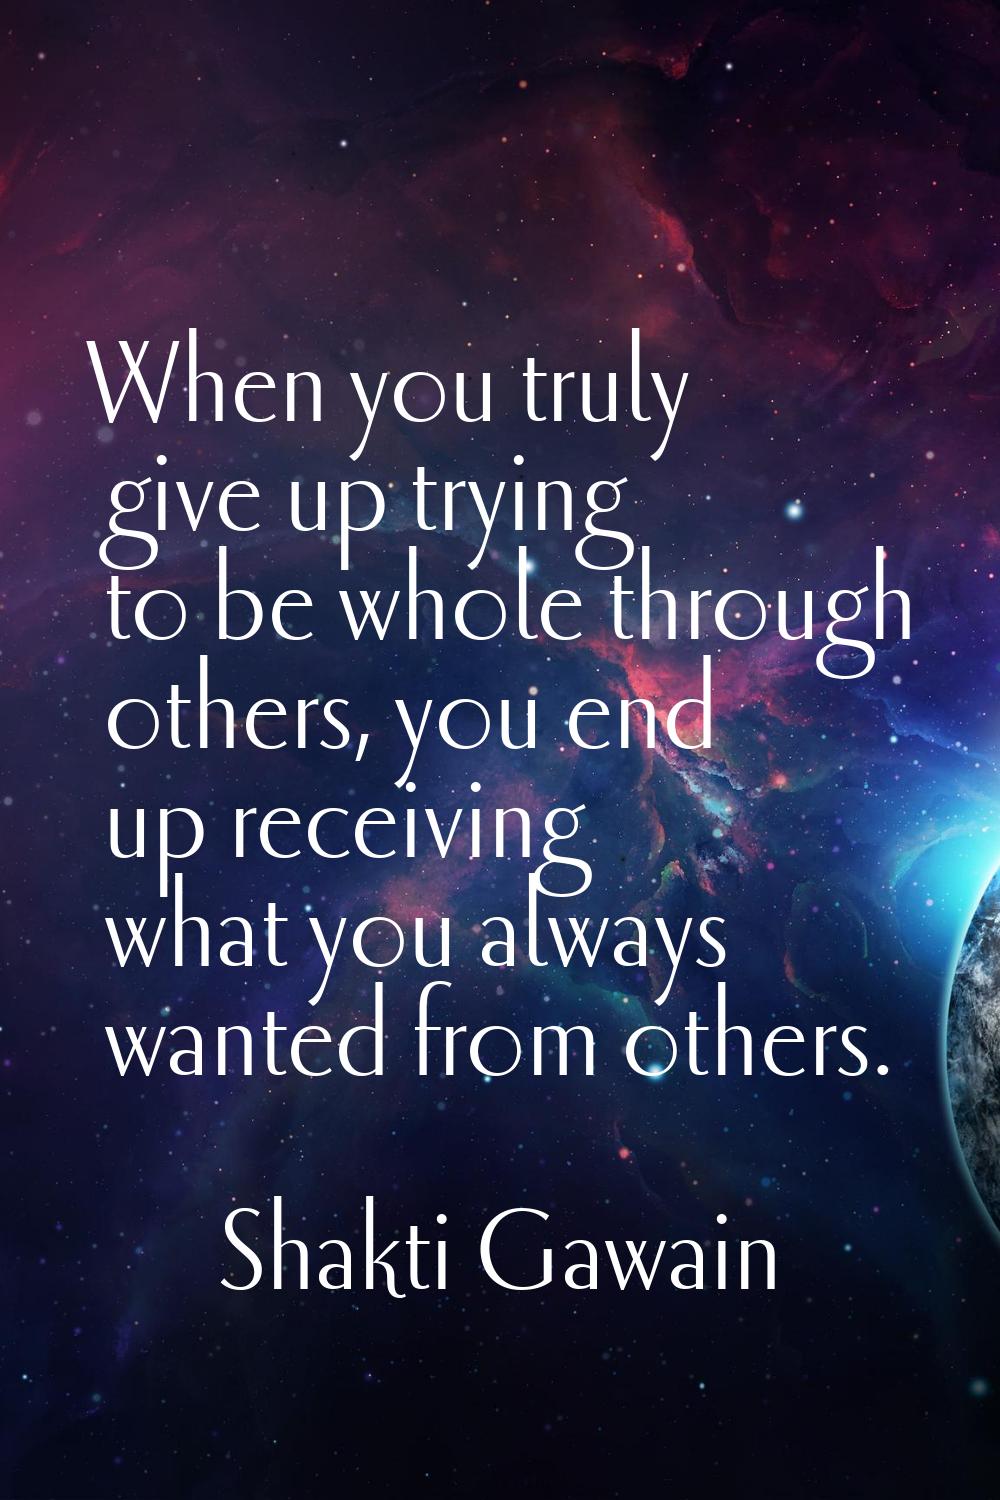 When you truly give up trying to be whole through others, you end up receiving what you always want